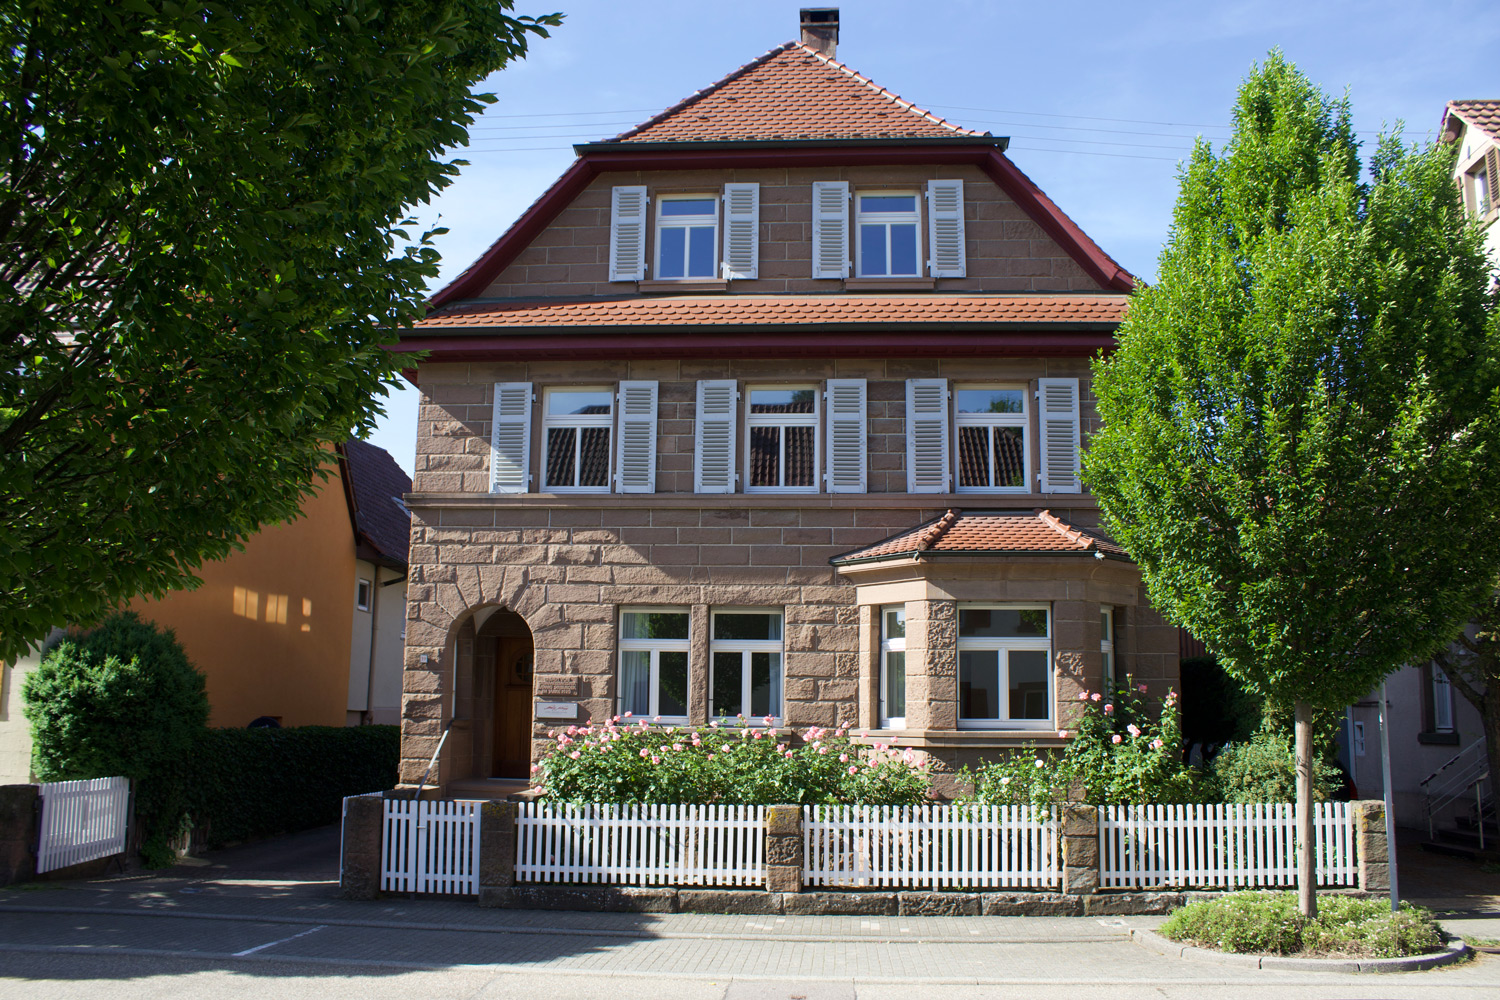 ludwig seeburger stiftung house